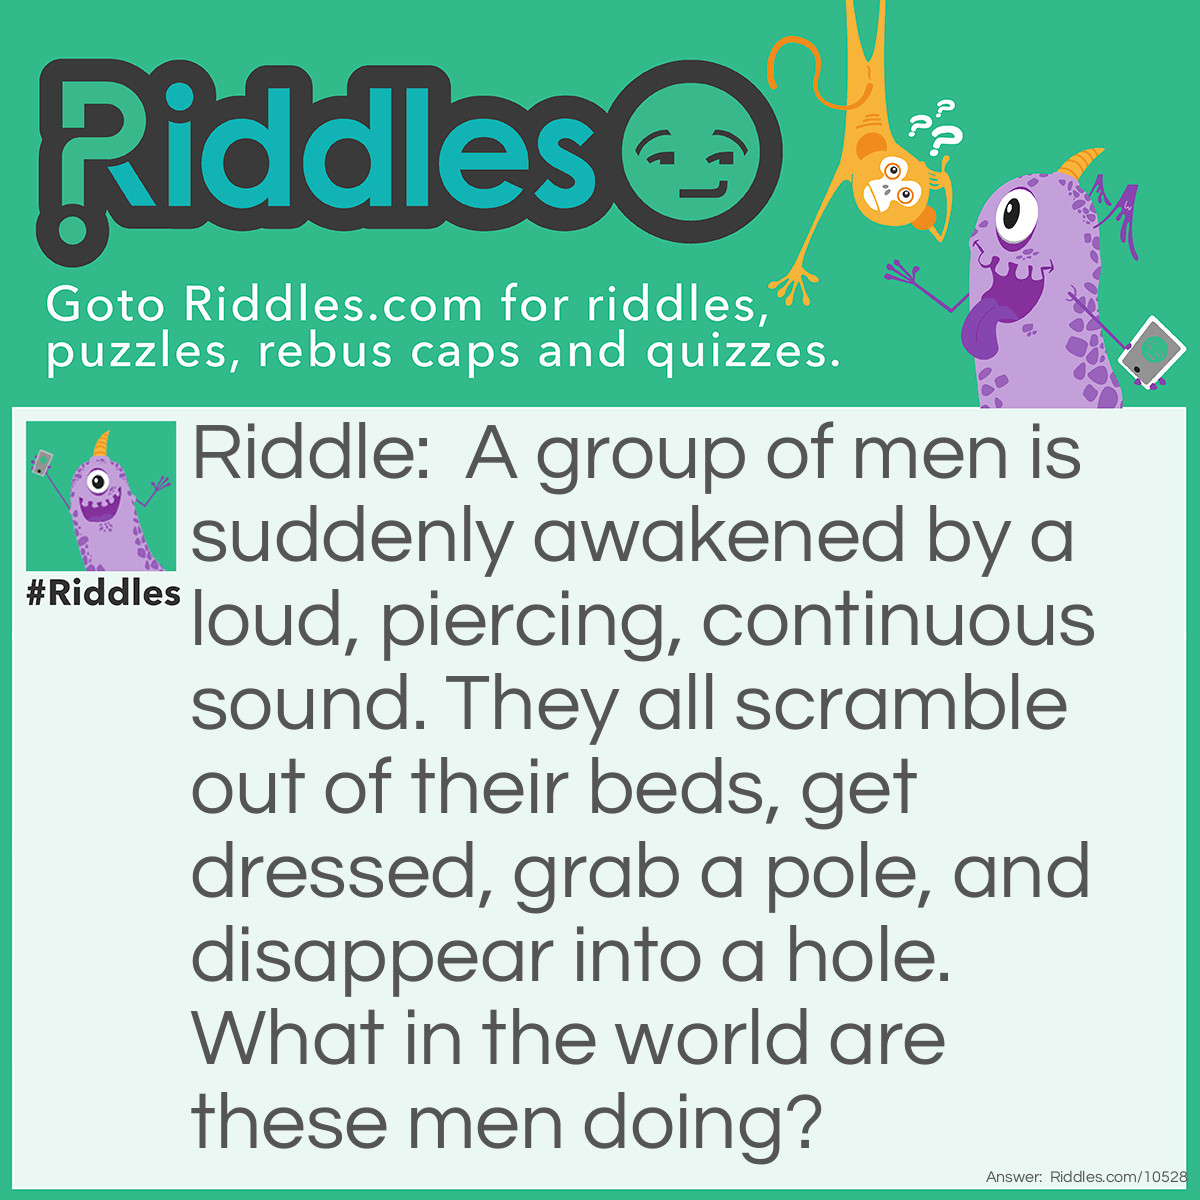 Riddle: A group of men is suddenly awakened by a loud, piercing, continuous sound. They all scramble out of their beds, get dressed, grab a pole, and disappear into a hole. What in the world are these men doing? Answer: The men are firemen who were on night-shift duty at their firehouse. When they heard the fire alarm, they got dressed, slid down the fire pole, and got in the fire truck.